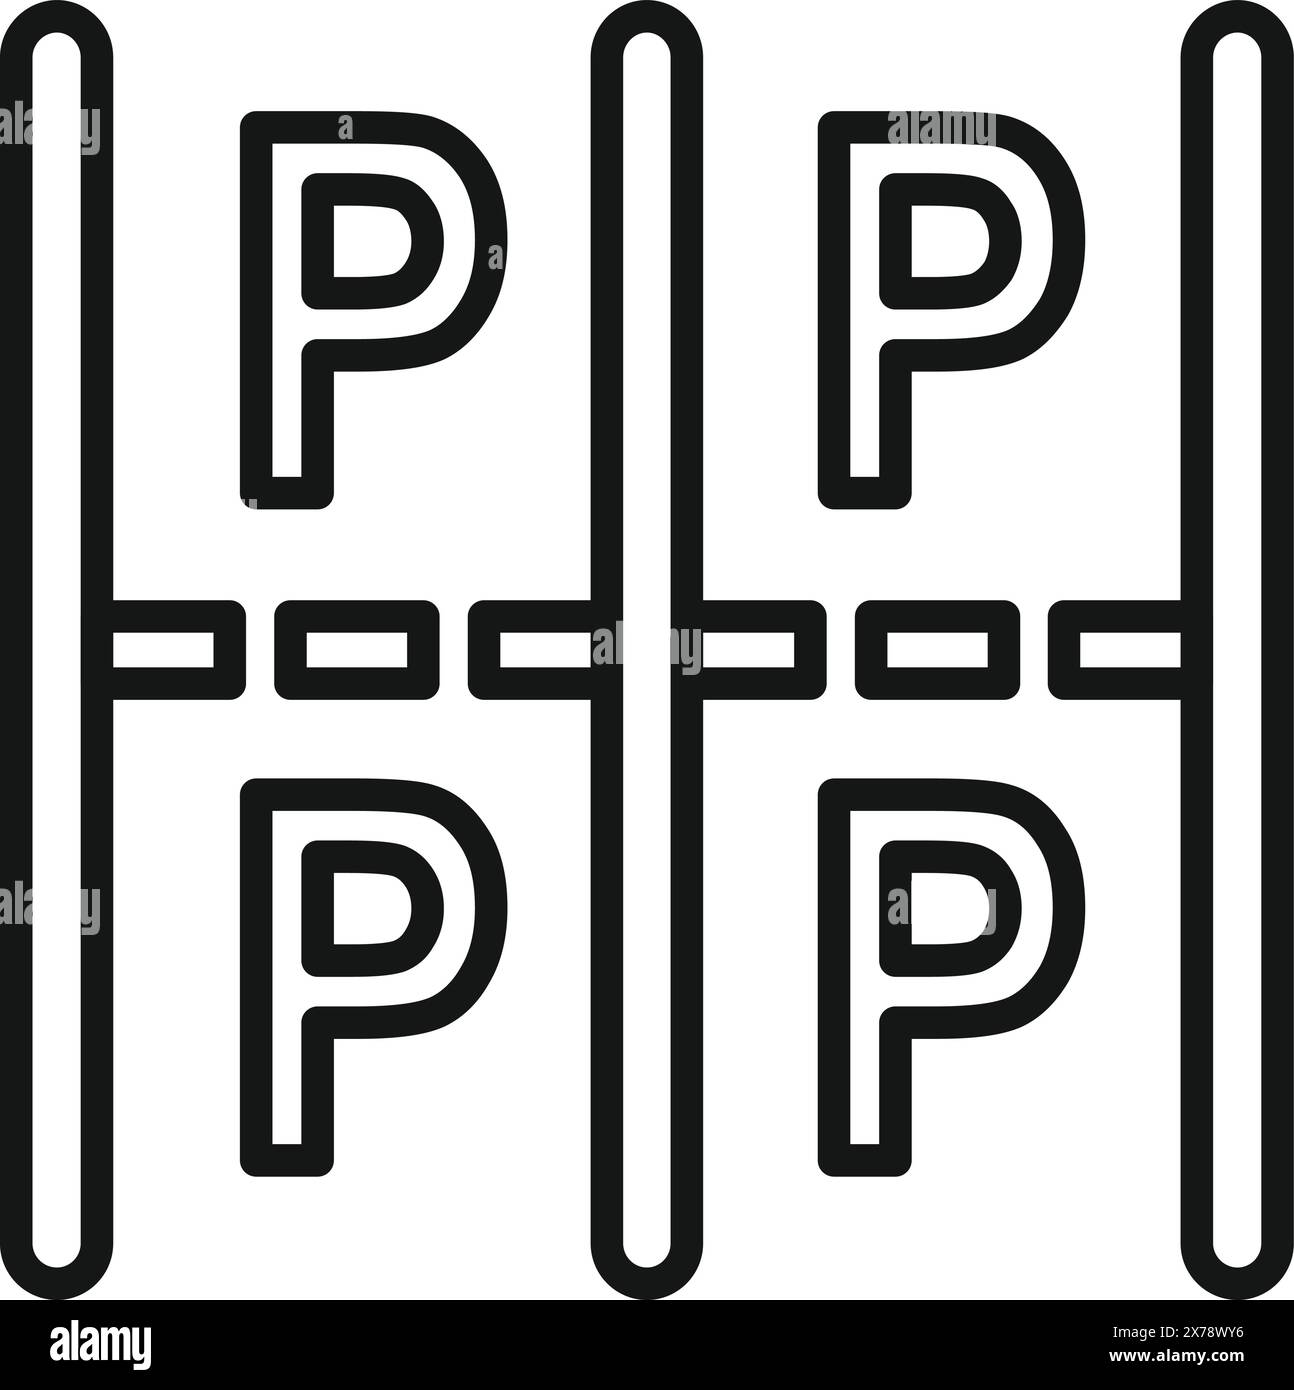 Black and white illustration of ppp letters within a structured grid design Stock Vector